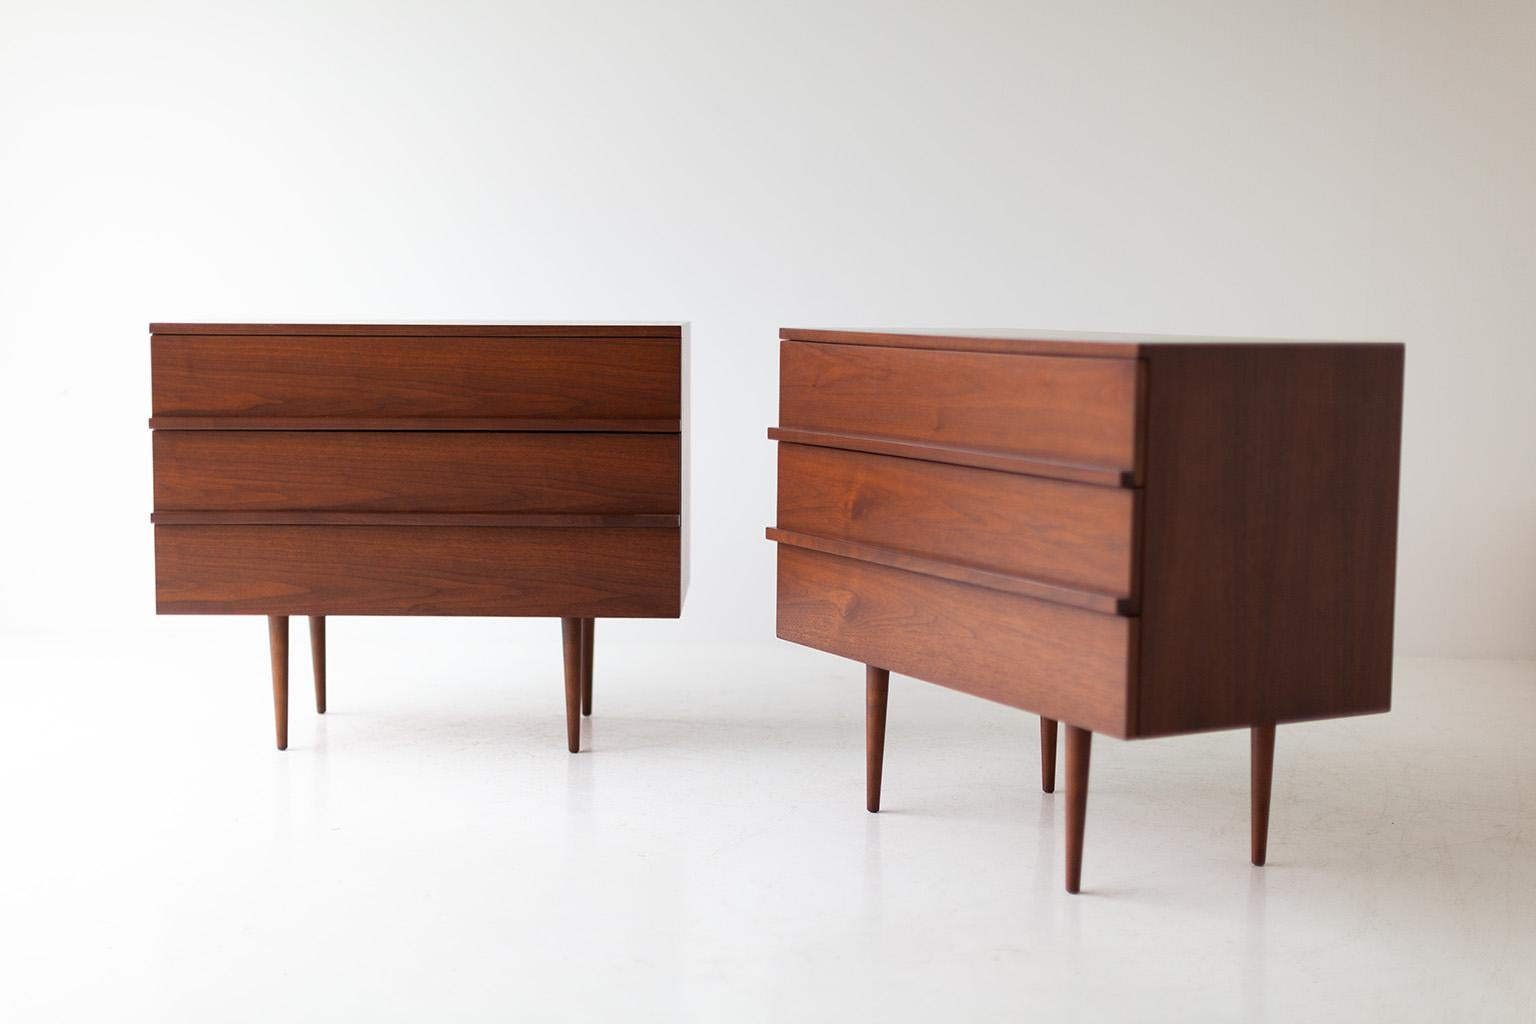 Designer: Mel Smilow

Manufacturer: Smilow-Thielle
Period or model: Mid-Century Modern
Specifications: Walnut

Condition:

These Mel Smilow chests for Smilow-Thielle are in excellent condition. The chests are structurally sound and have been